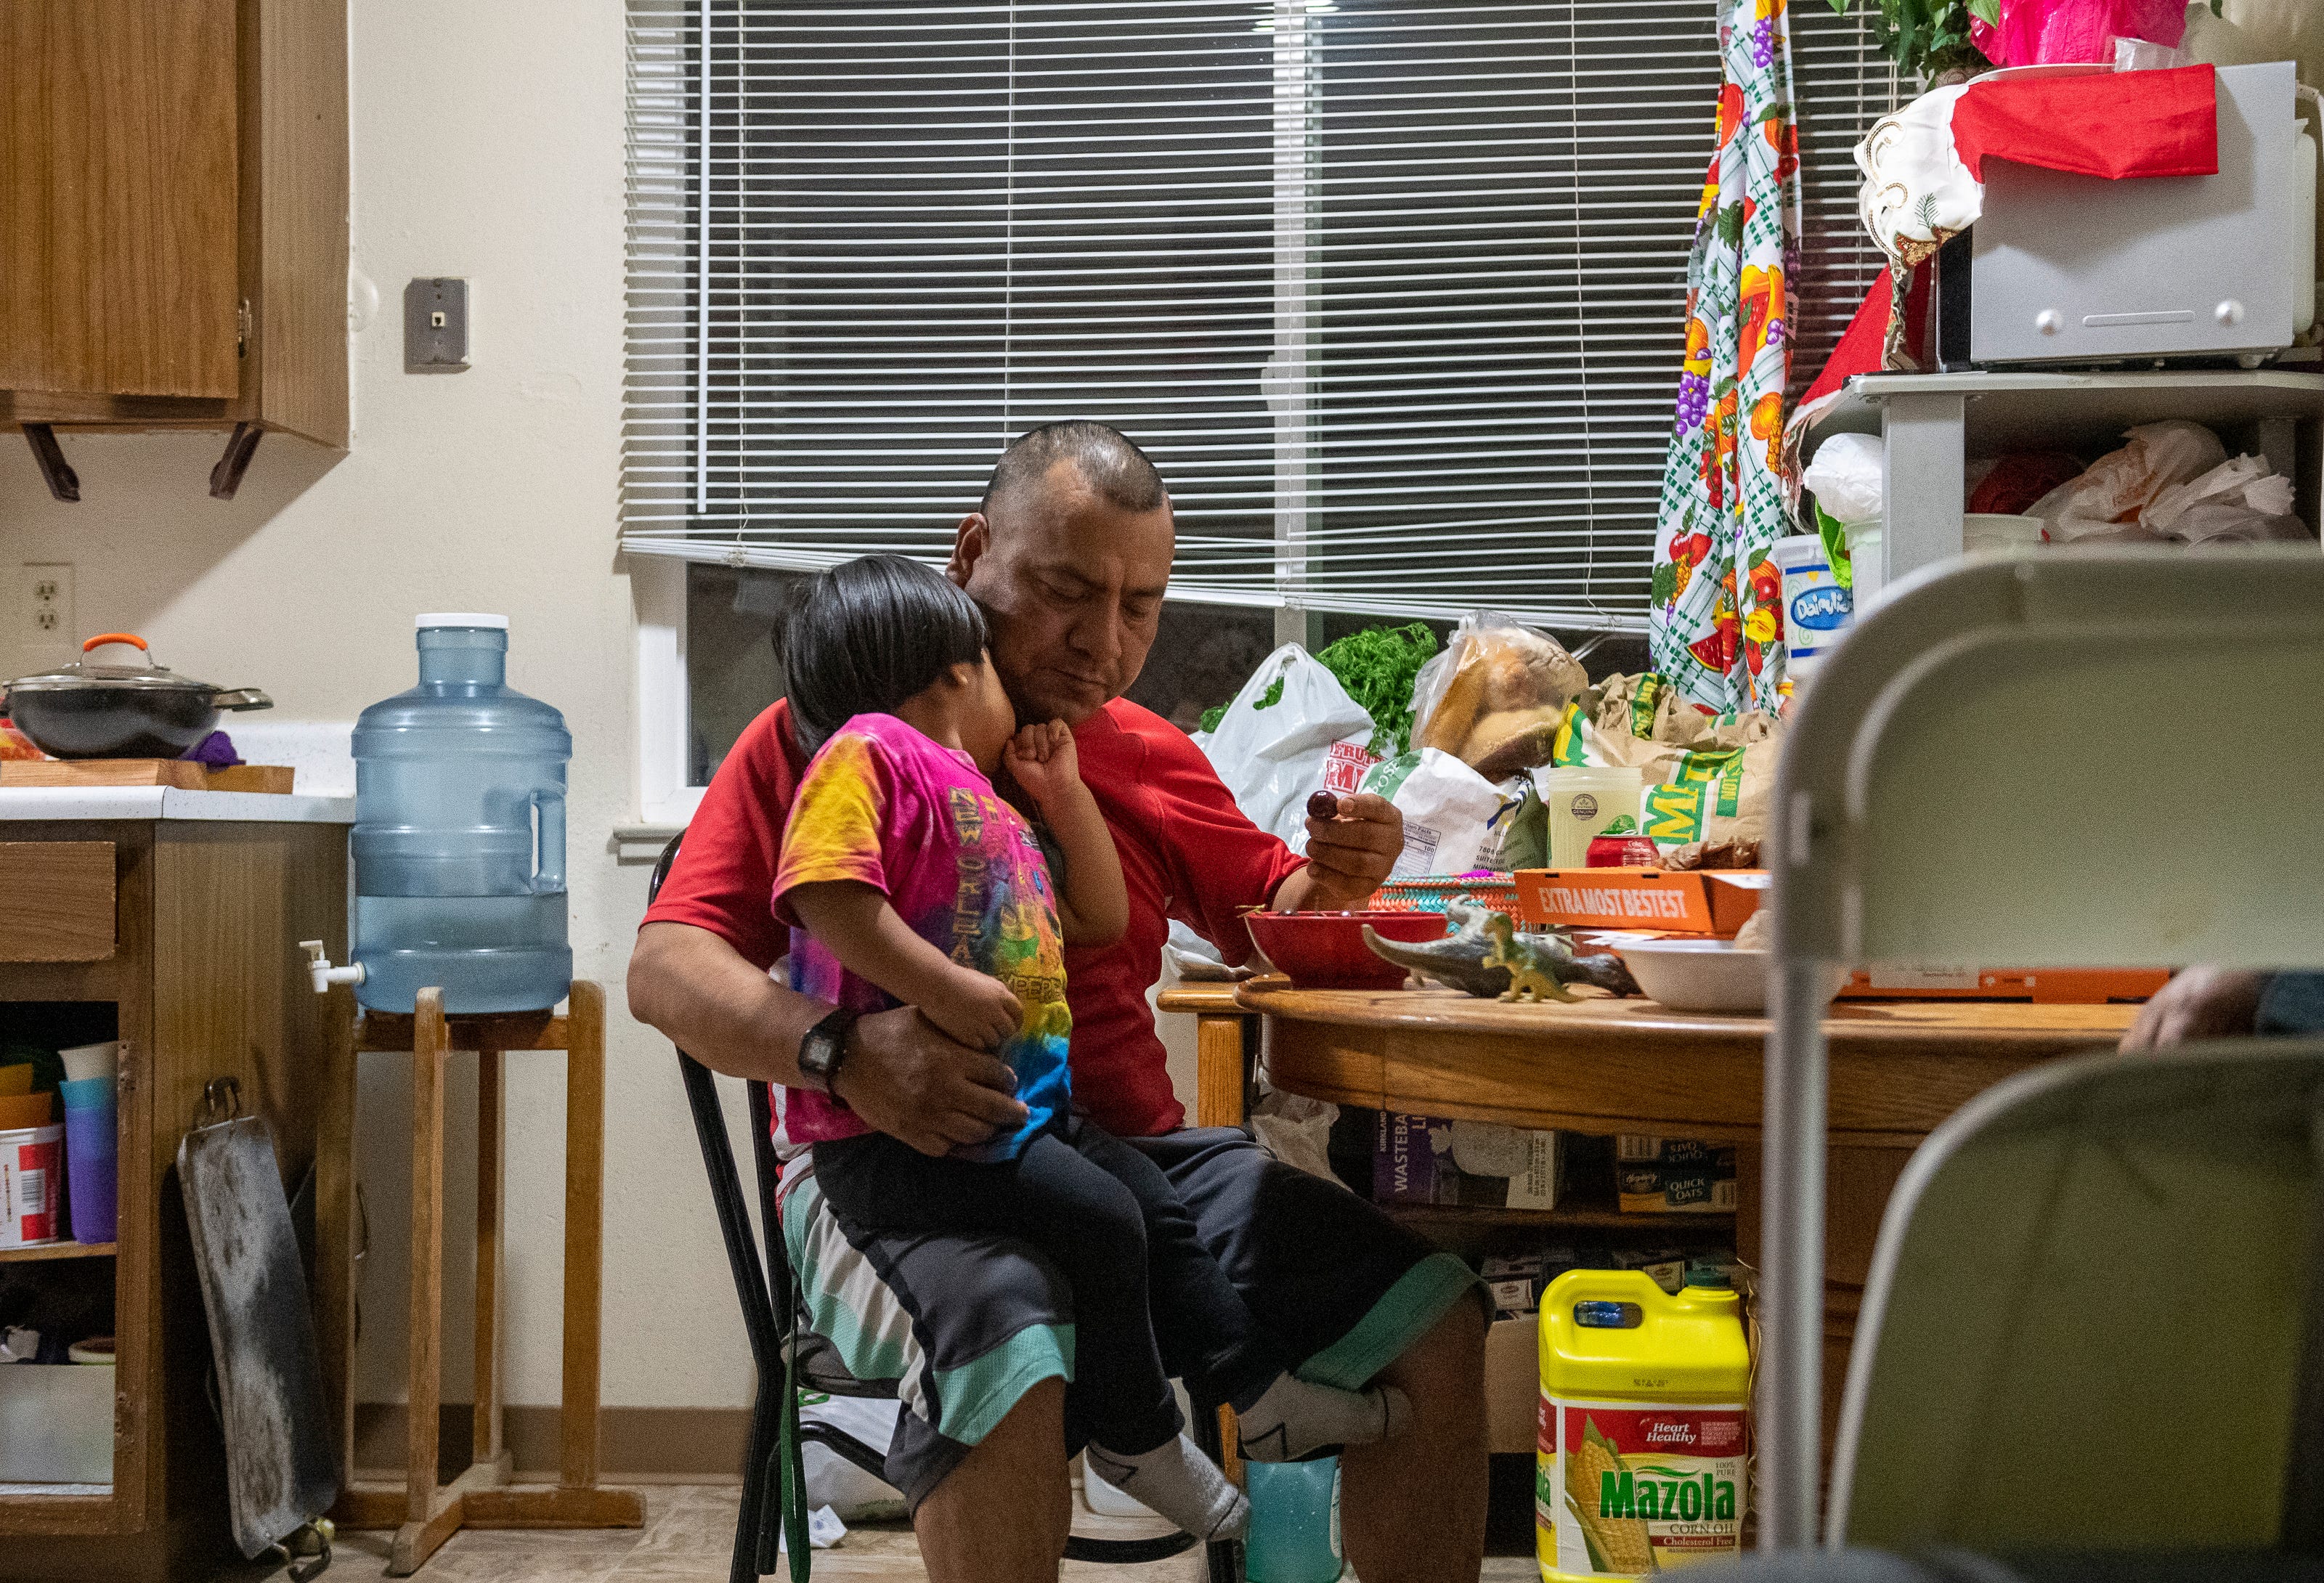 Jesus Salvador, left, tucks his head into his father Meliton's neck, as Meliton eats a cherry inside their two-room apartment on the north side of Salinas on May 16.